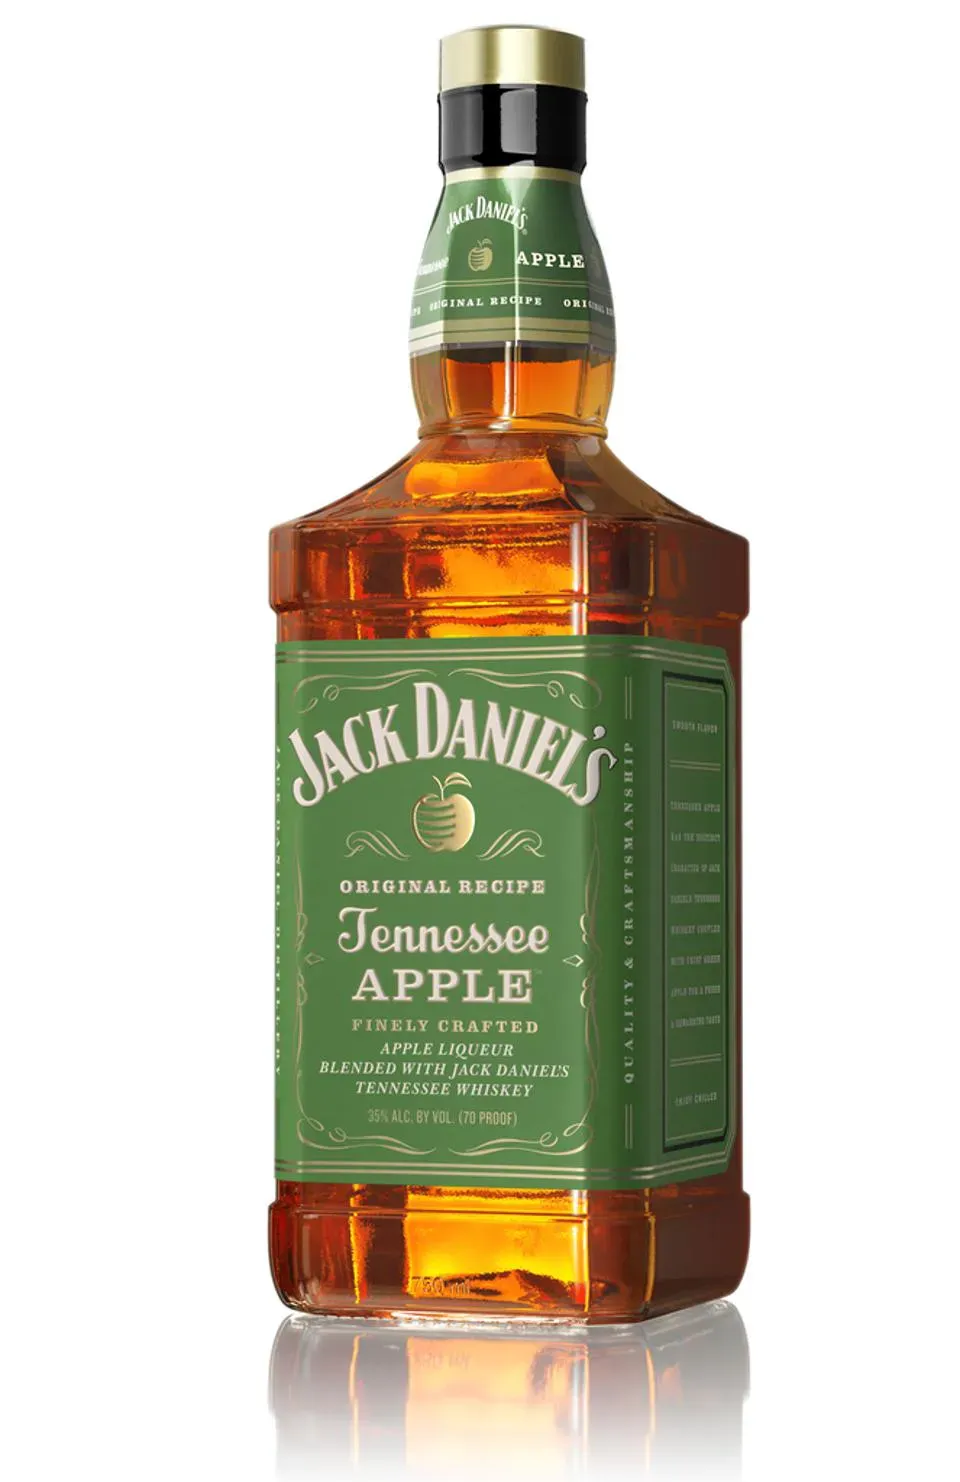 Image - Tennessee Apple by Jack Daniels